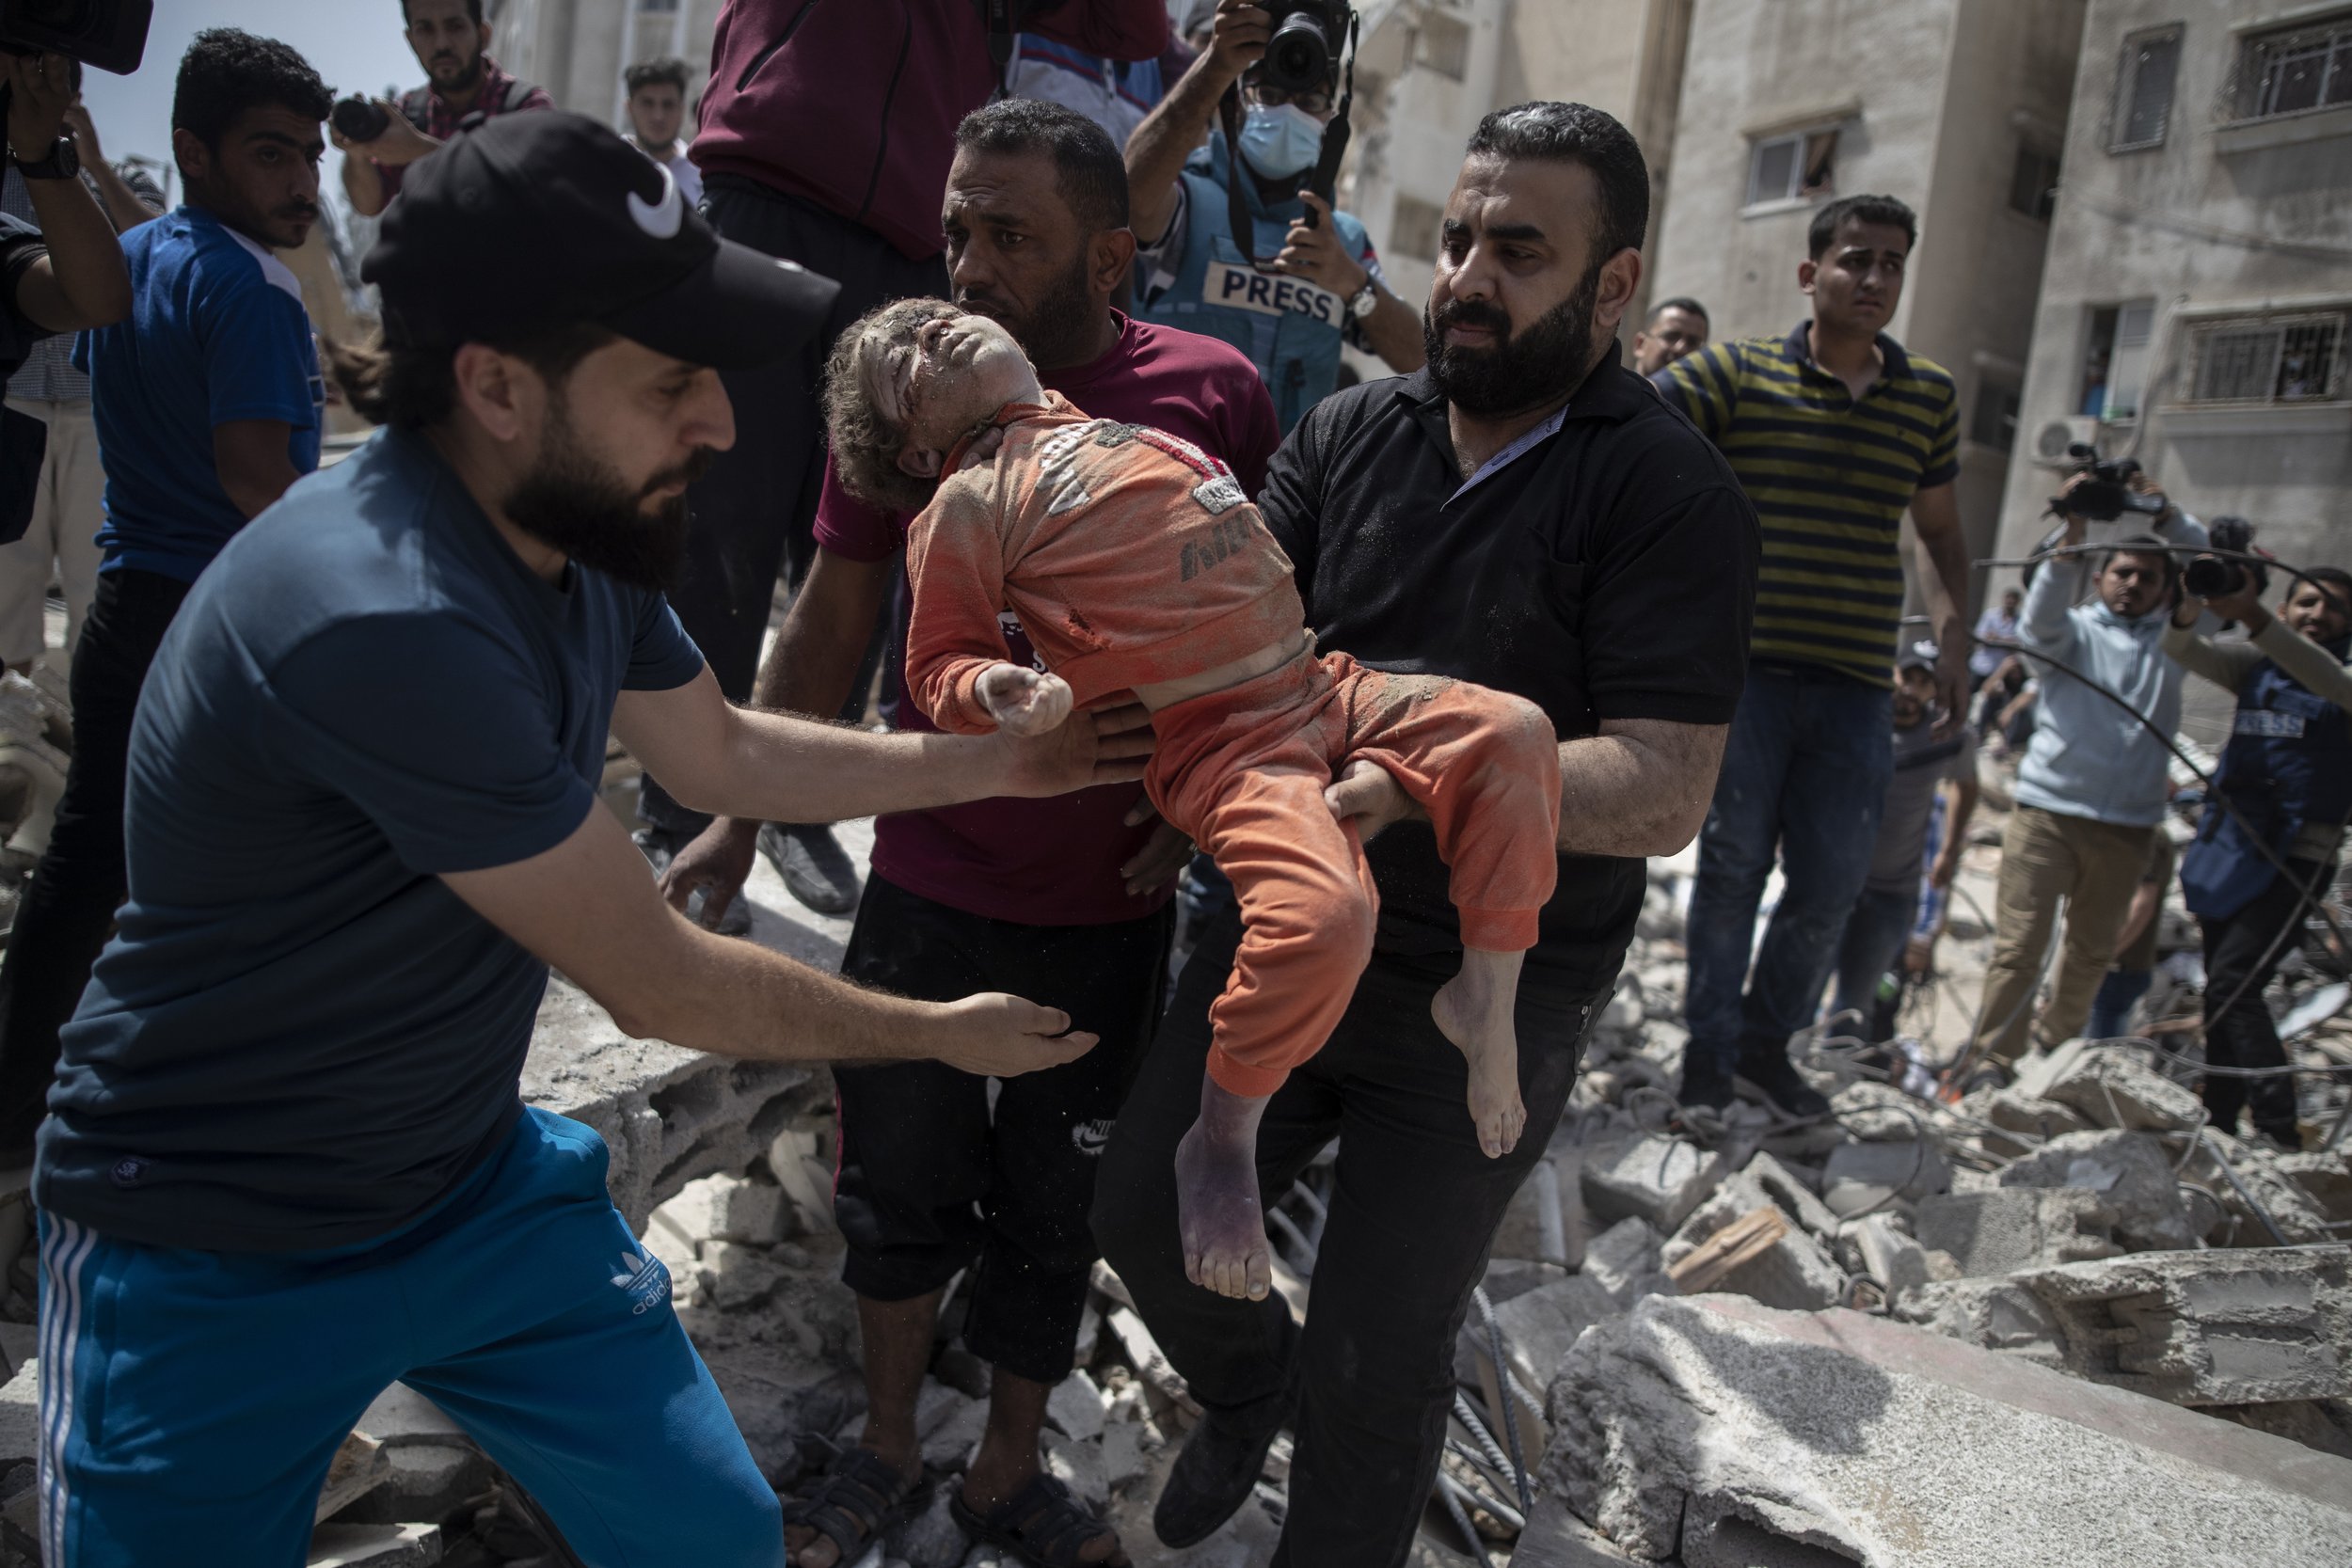  Men carry a dead child pulled from the rubble of a destroyed residential building in Gaza City following Israeli airstrikes on May 16, 2021, that flattened three buildings and killed at least two dozen people, according to medics. (AP Photo/Khalil H